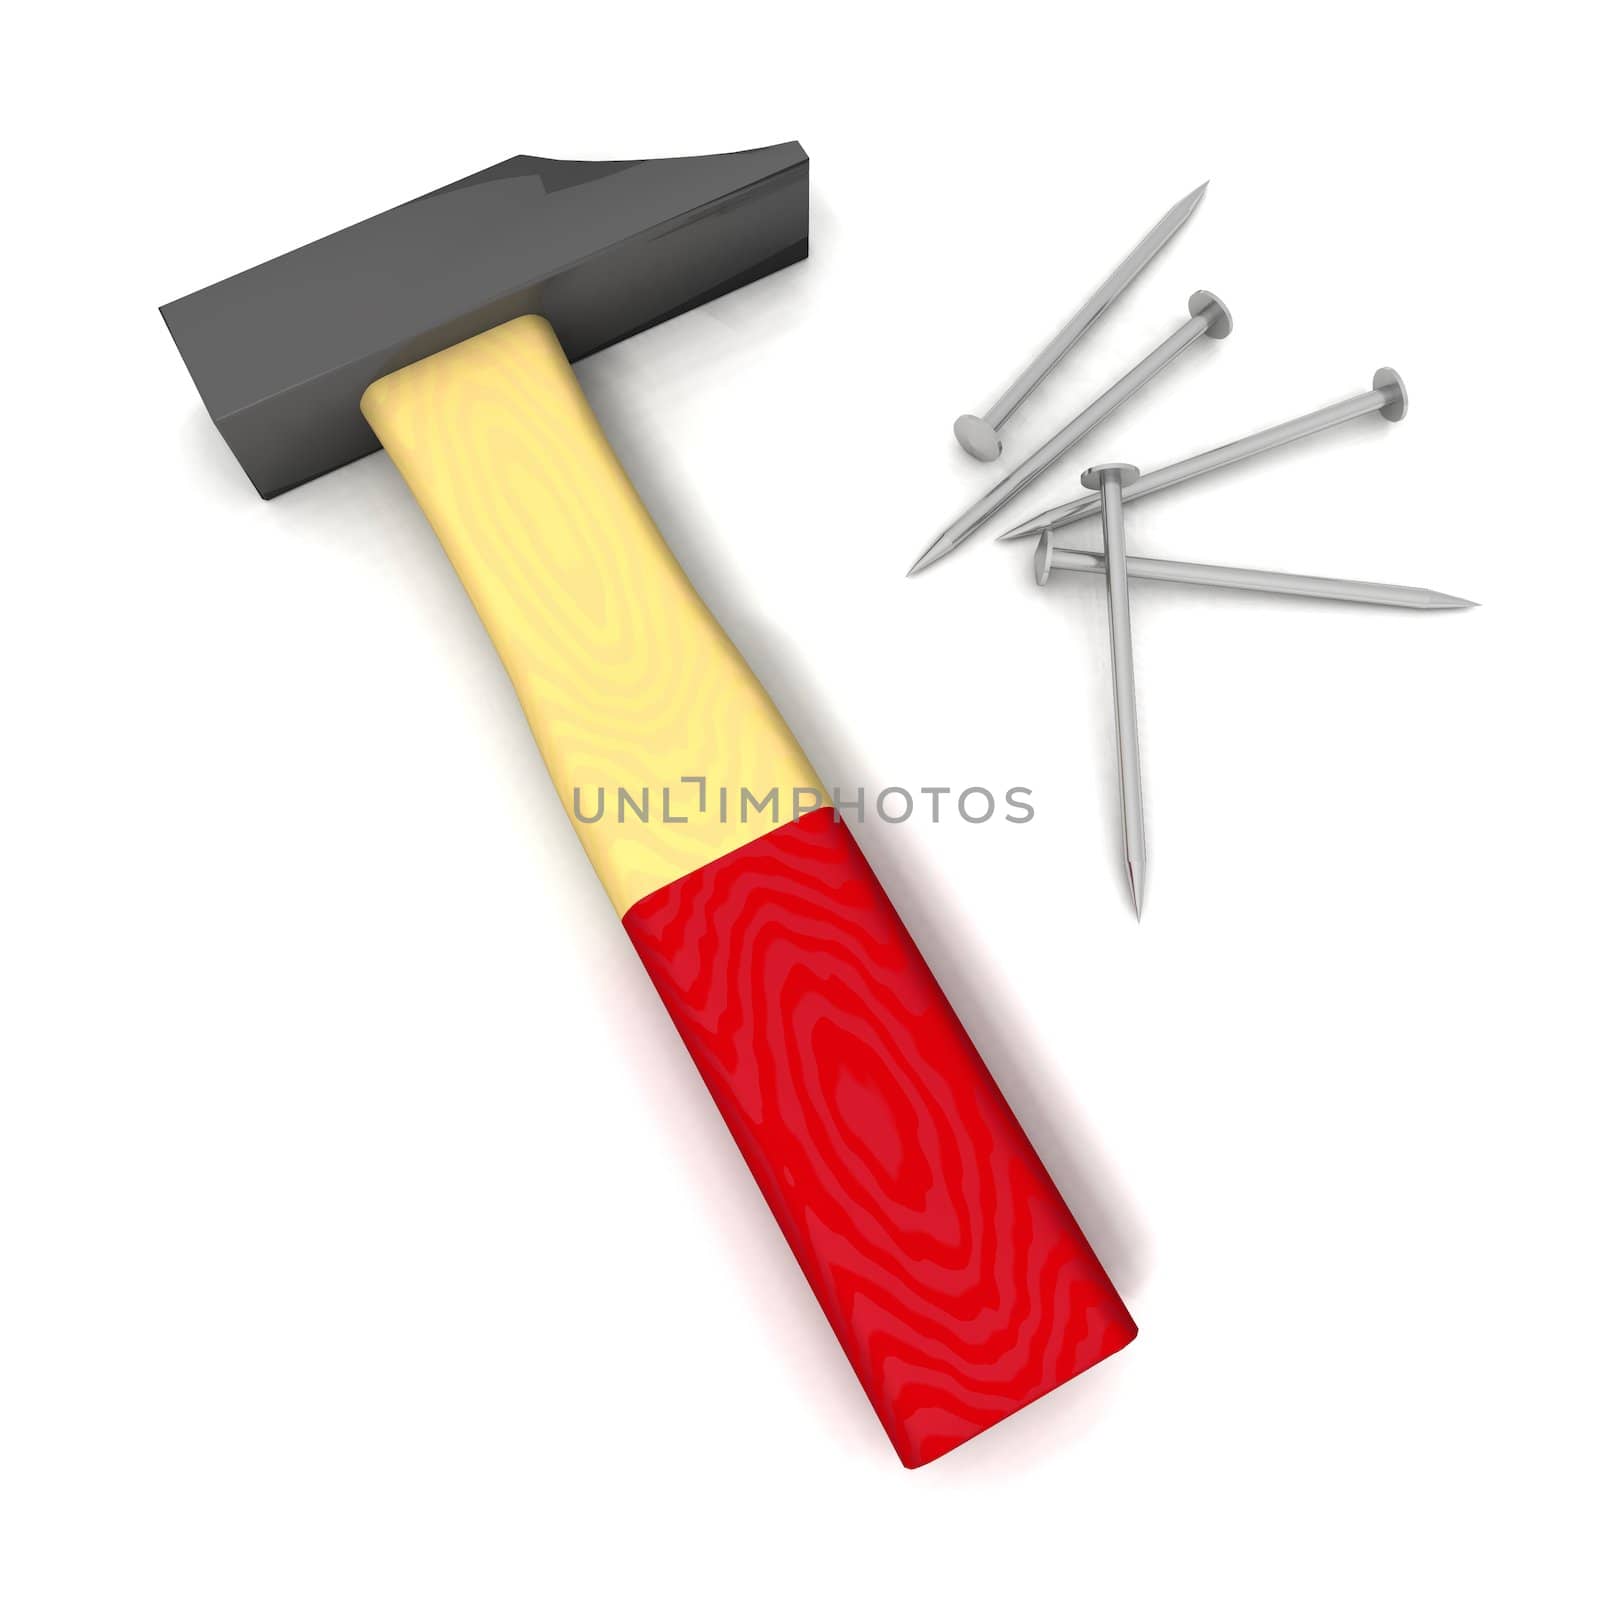 a 3d render of a hammer and some nails on a white background